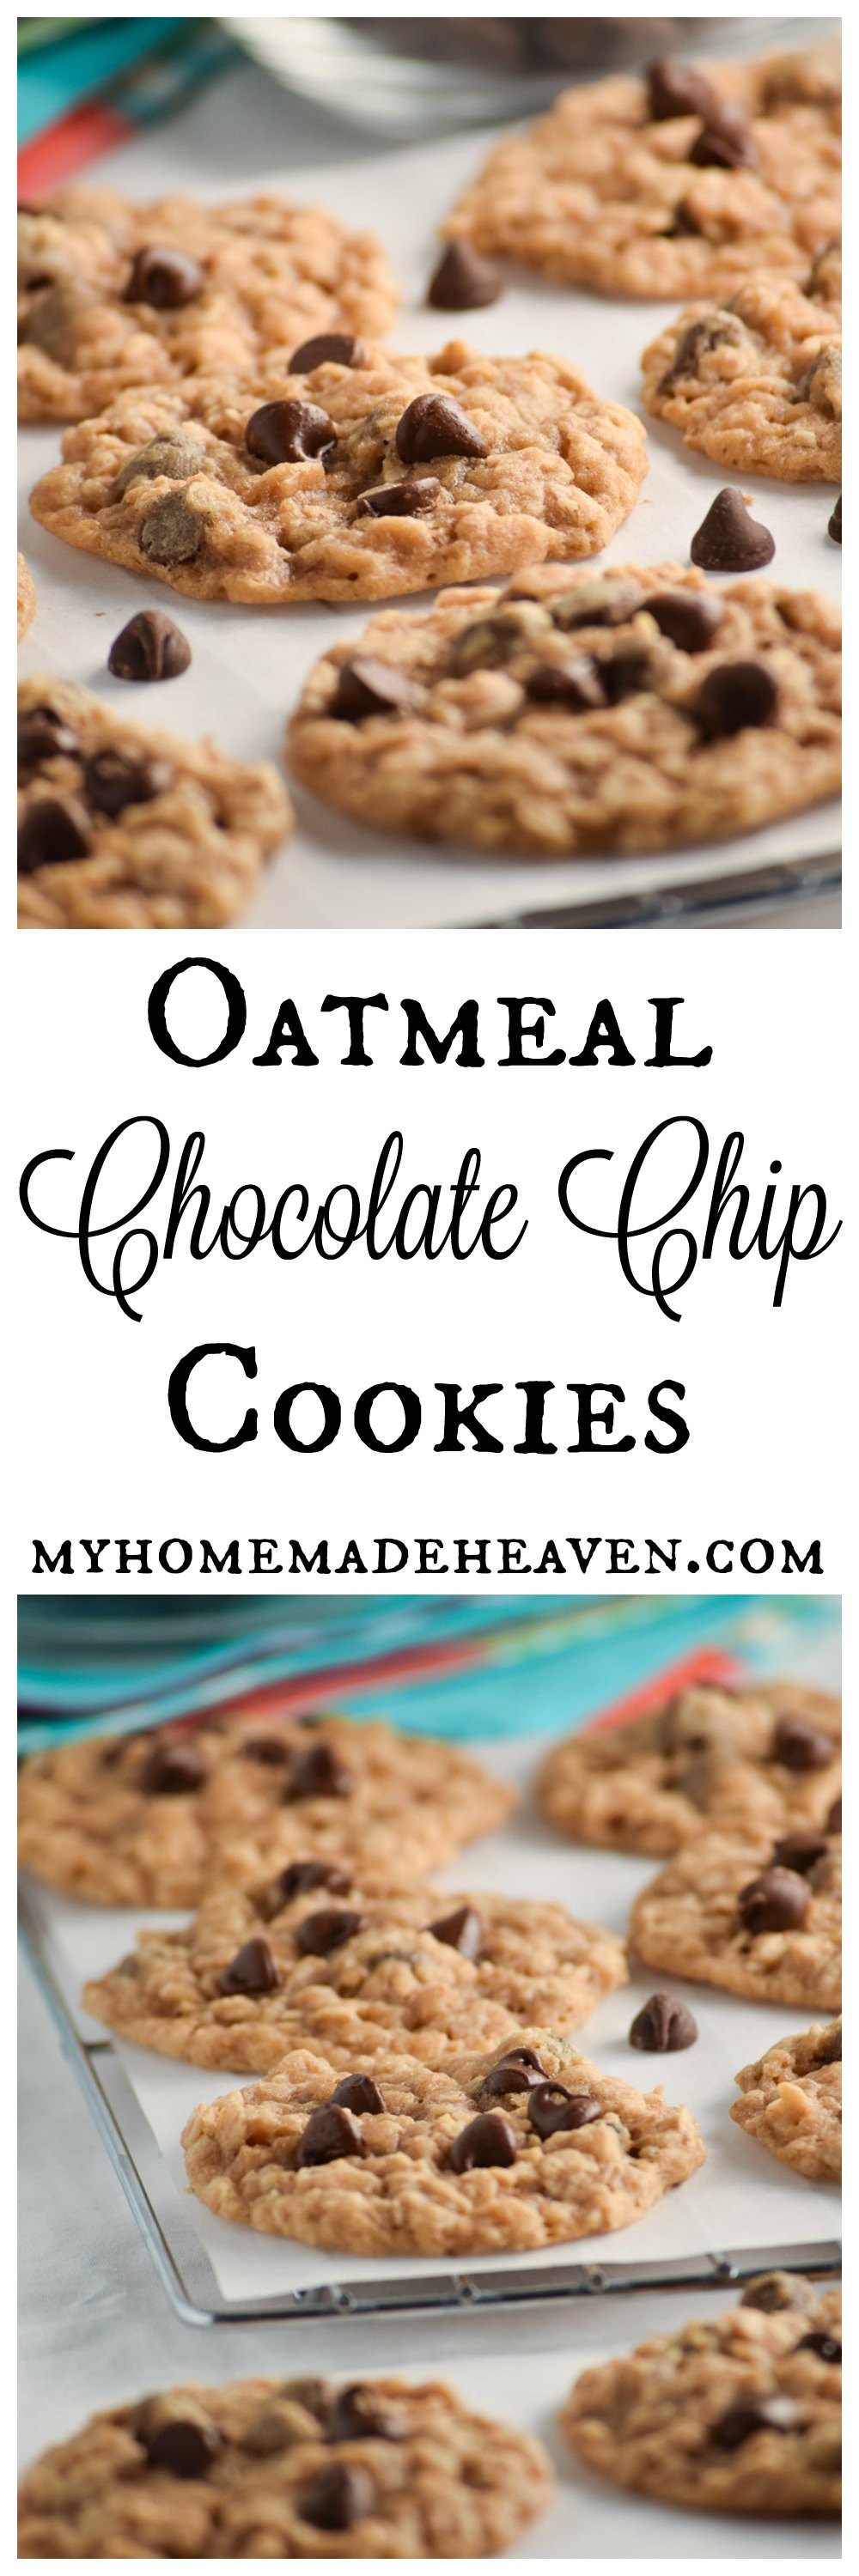 Chewy Oatmeal Chocolate Chip Cookies - My Homemade Heaven